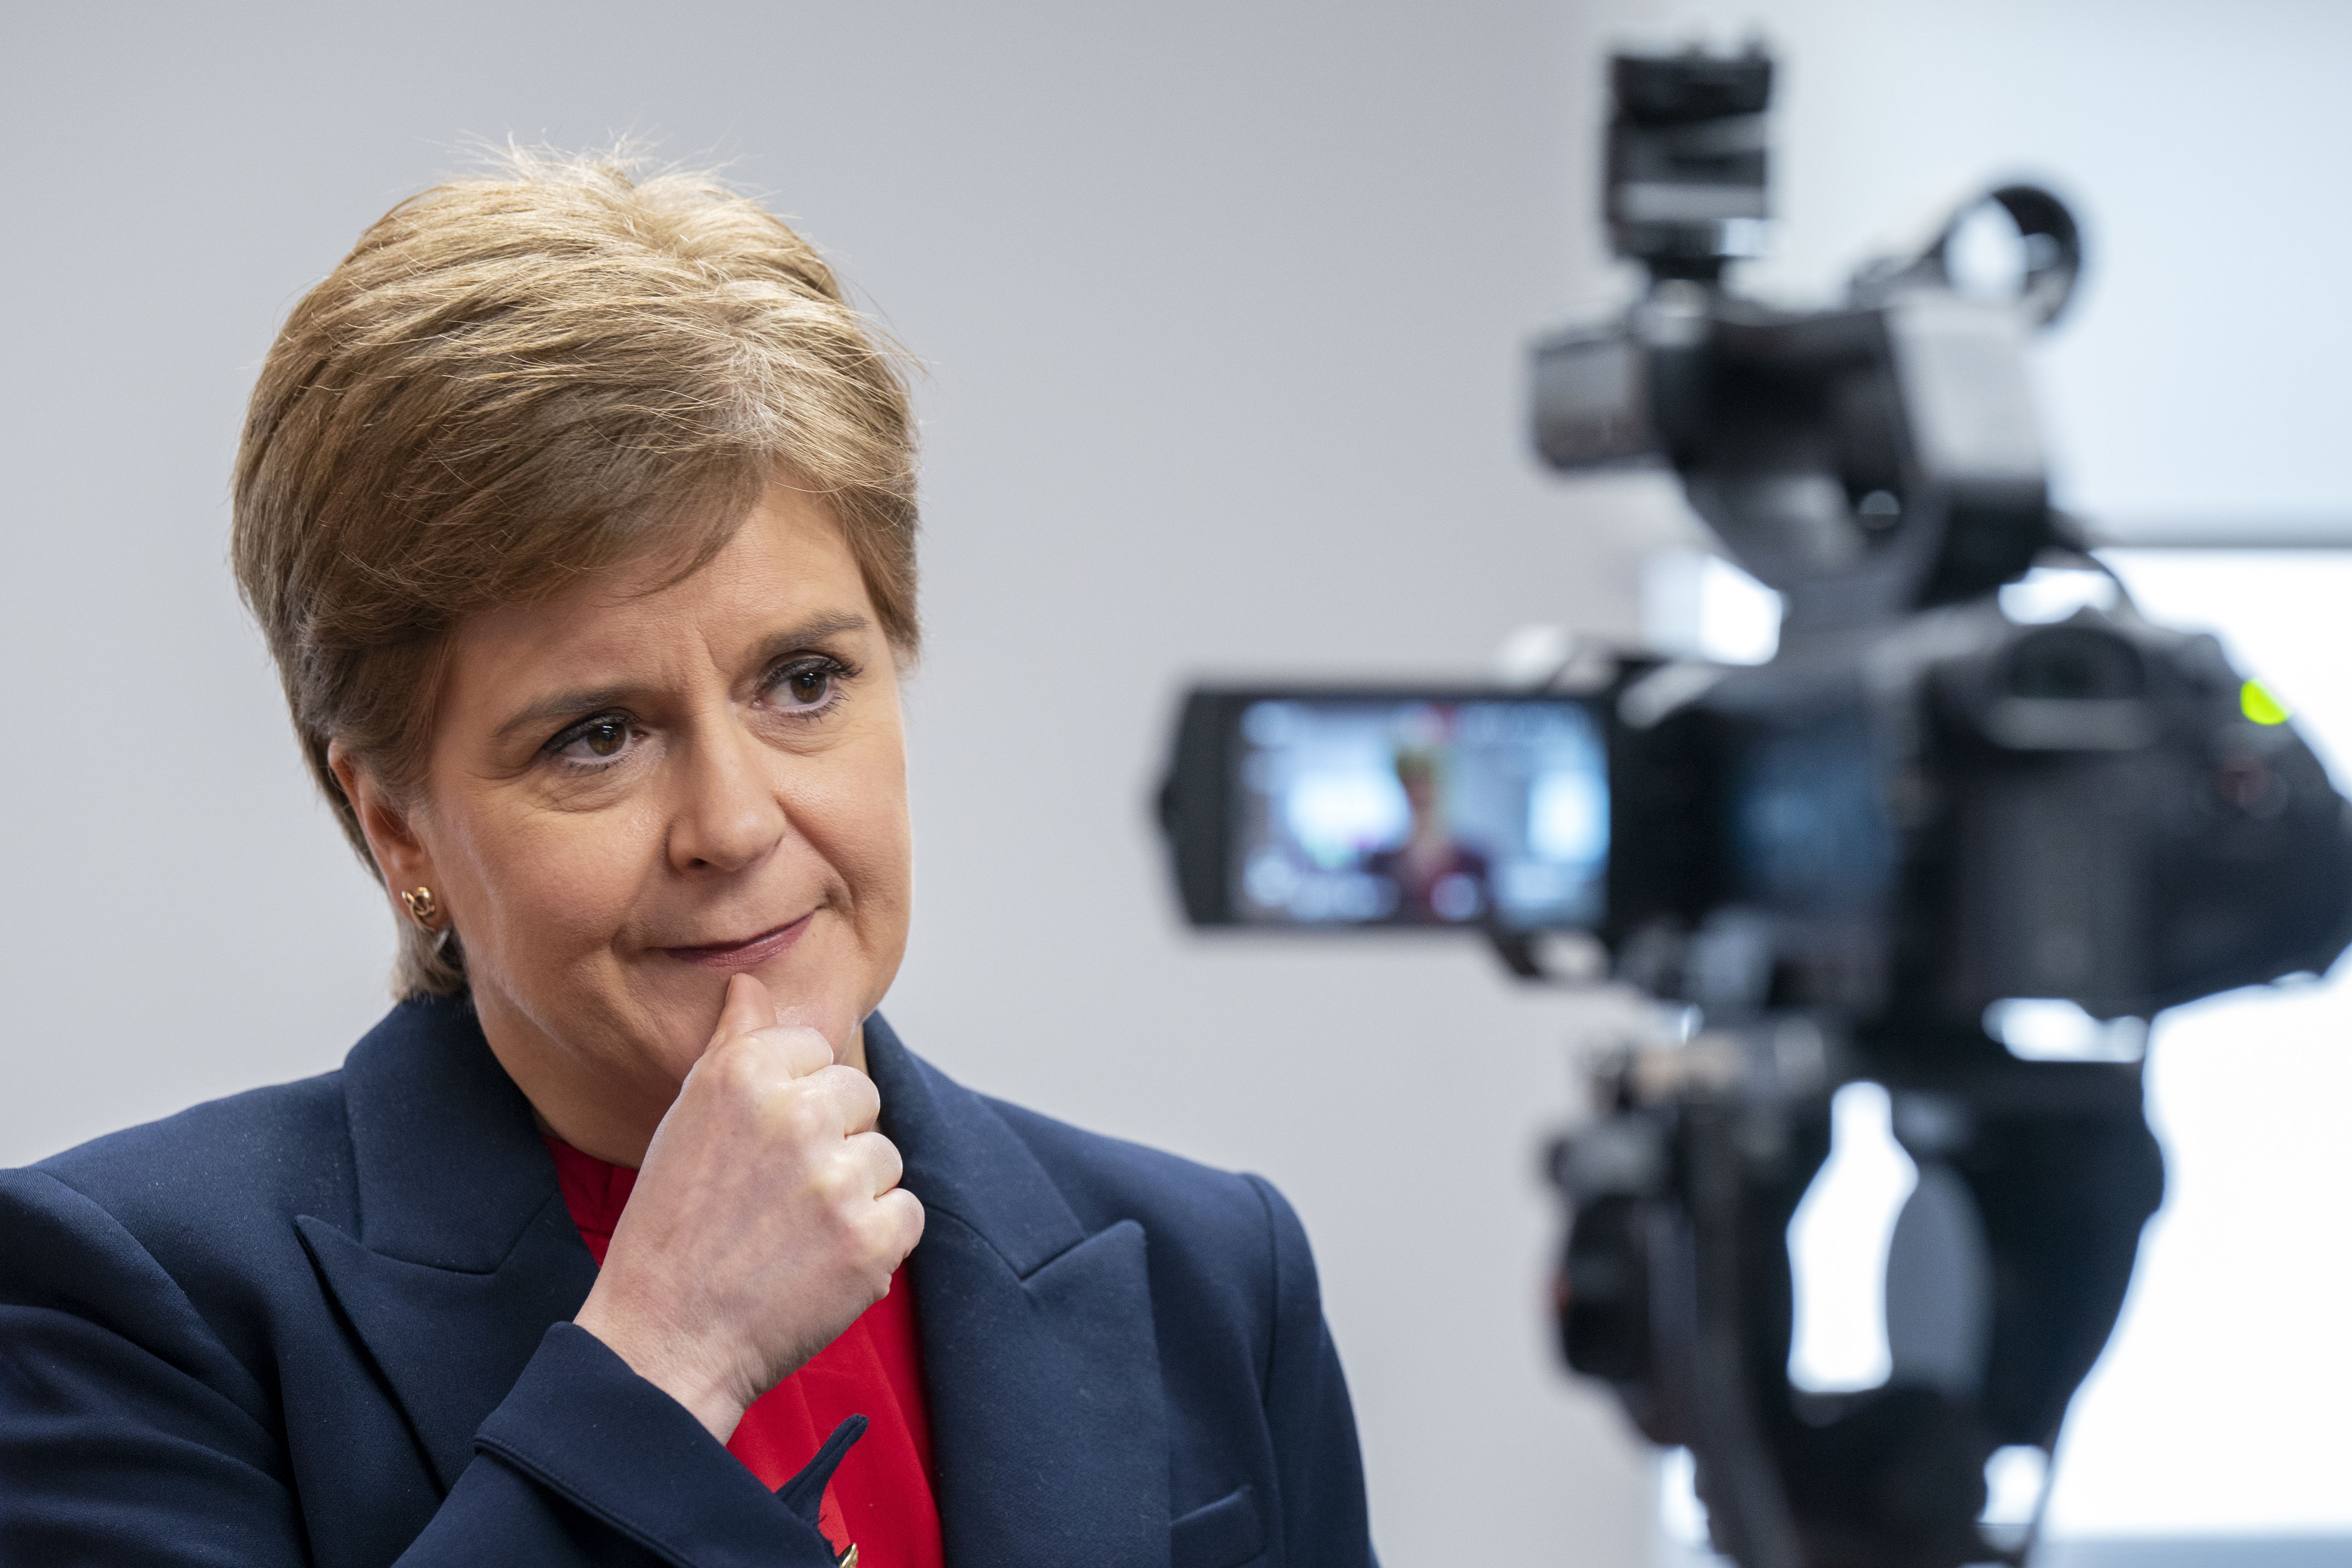 Nicola Sturgeon has said the Supreme Court judgment makes the case for independence